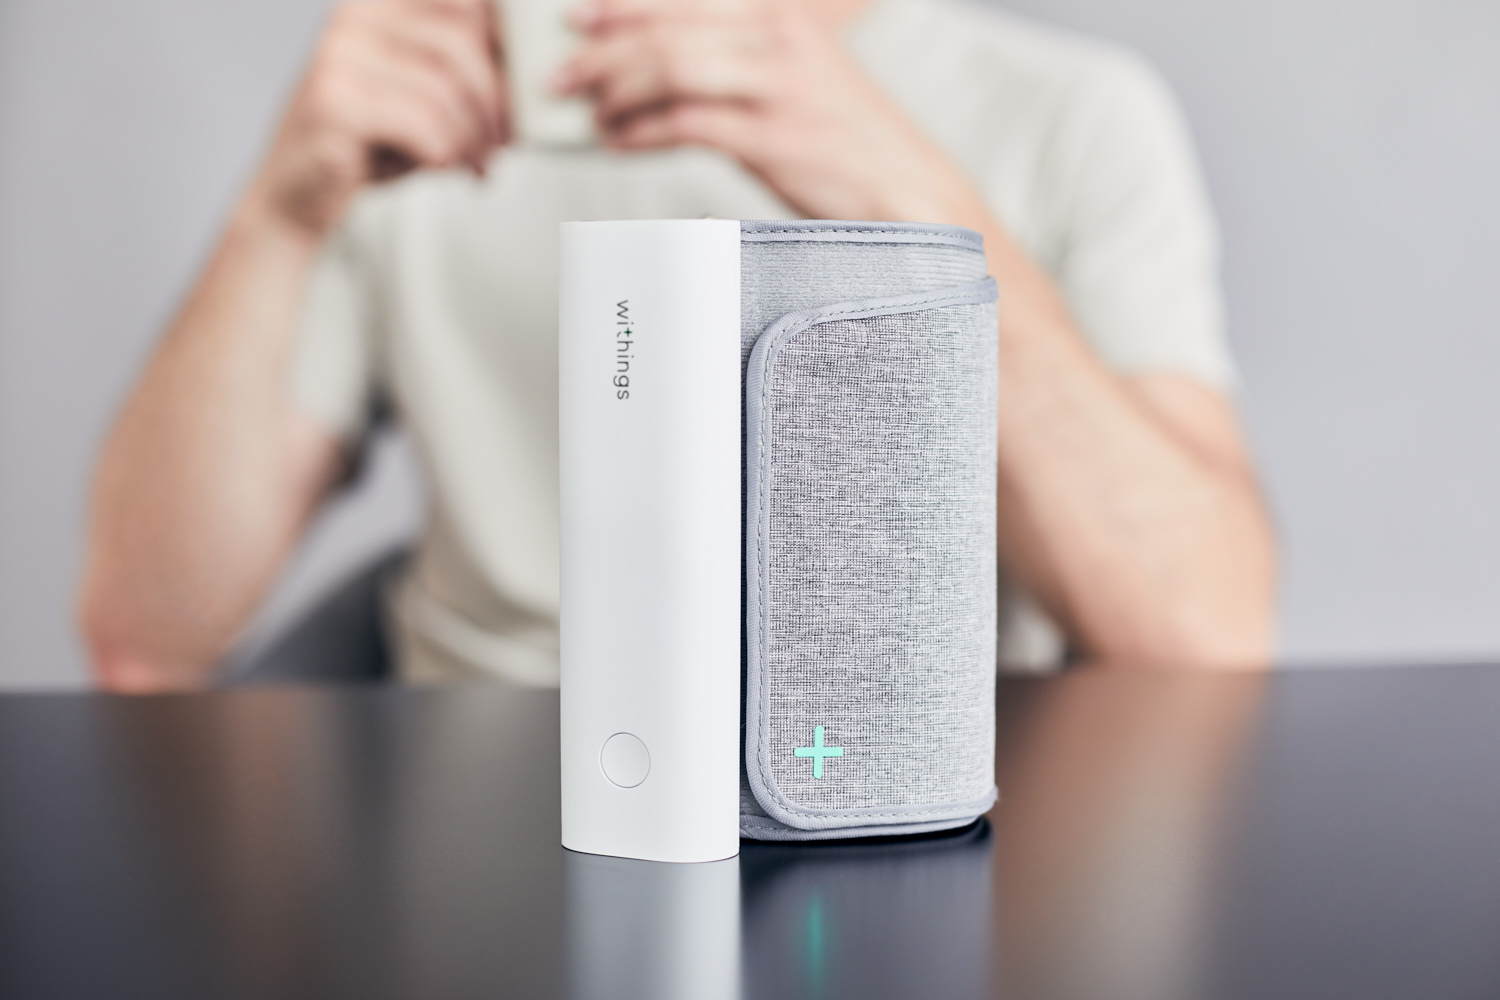 Withings blood pressure monitor for iPhone: My heart will go online - CNET